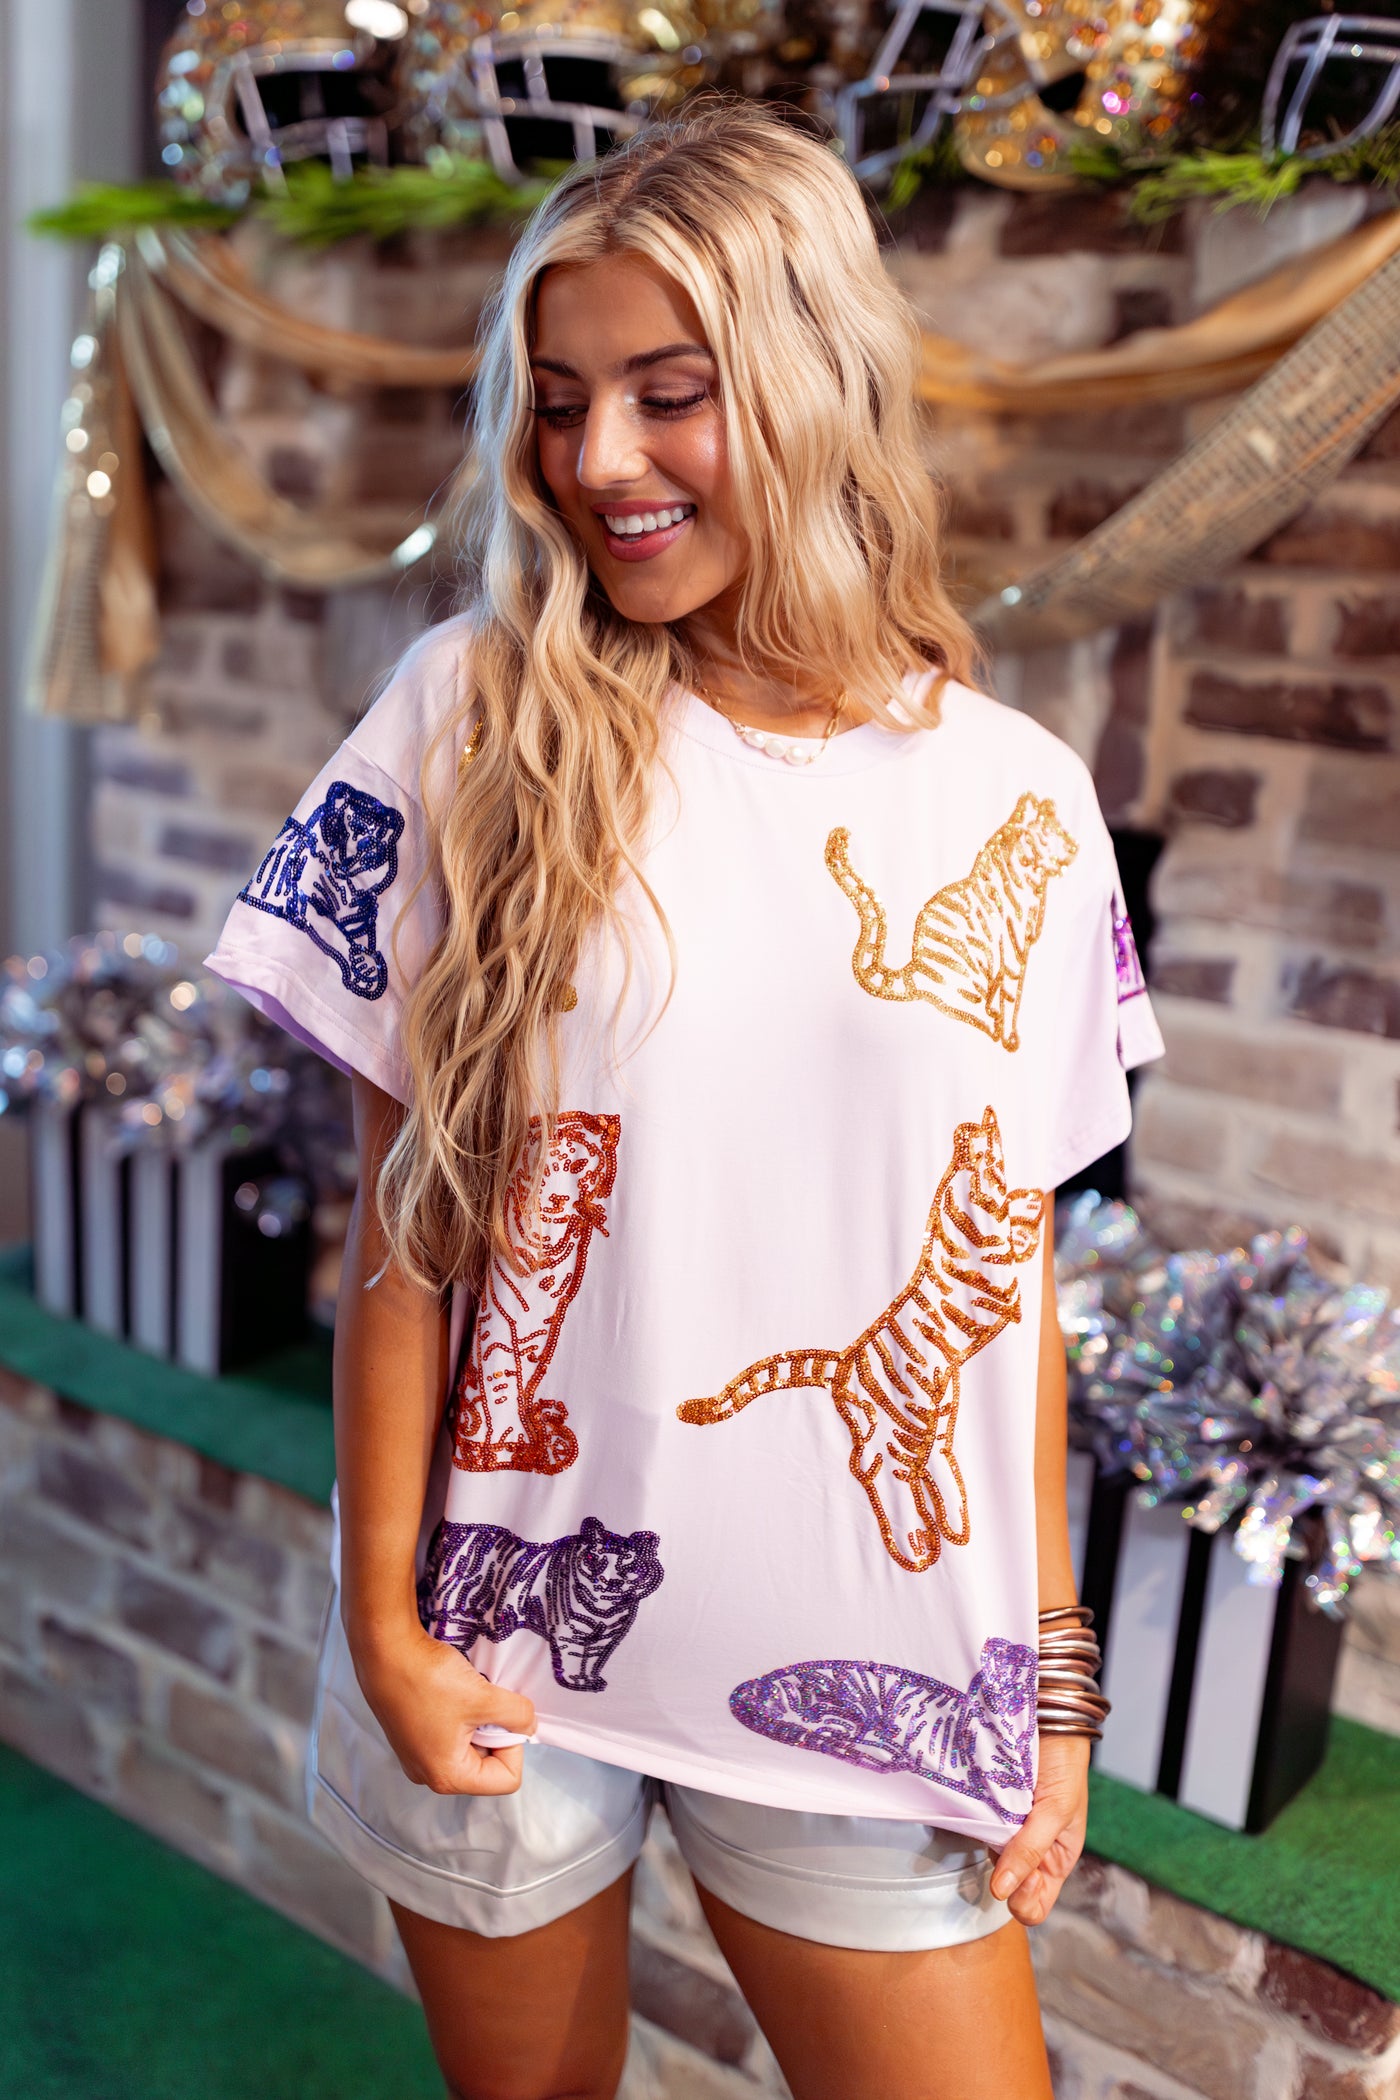 Queen of Sparkles Lavender & Rainbow Tiger Tee